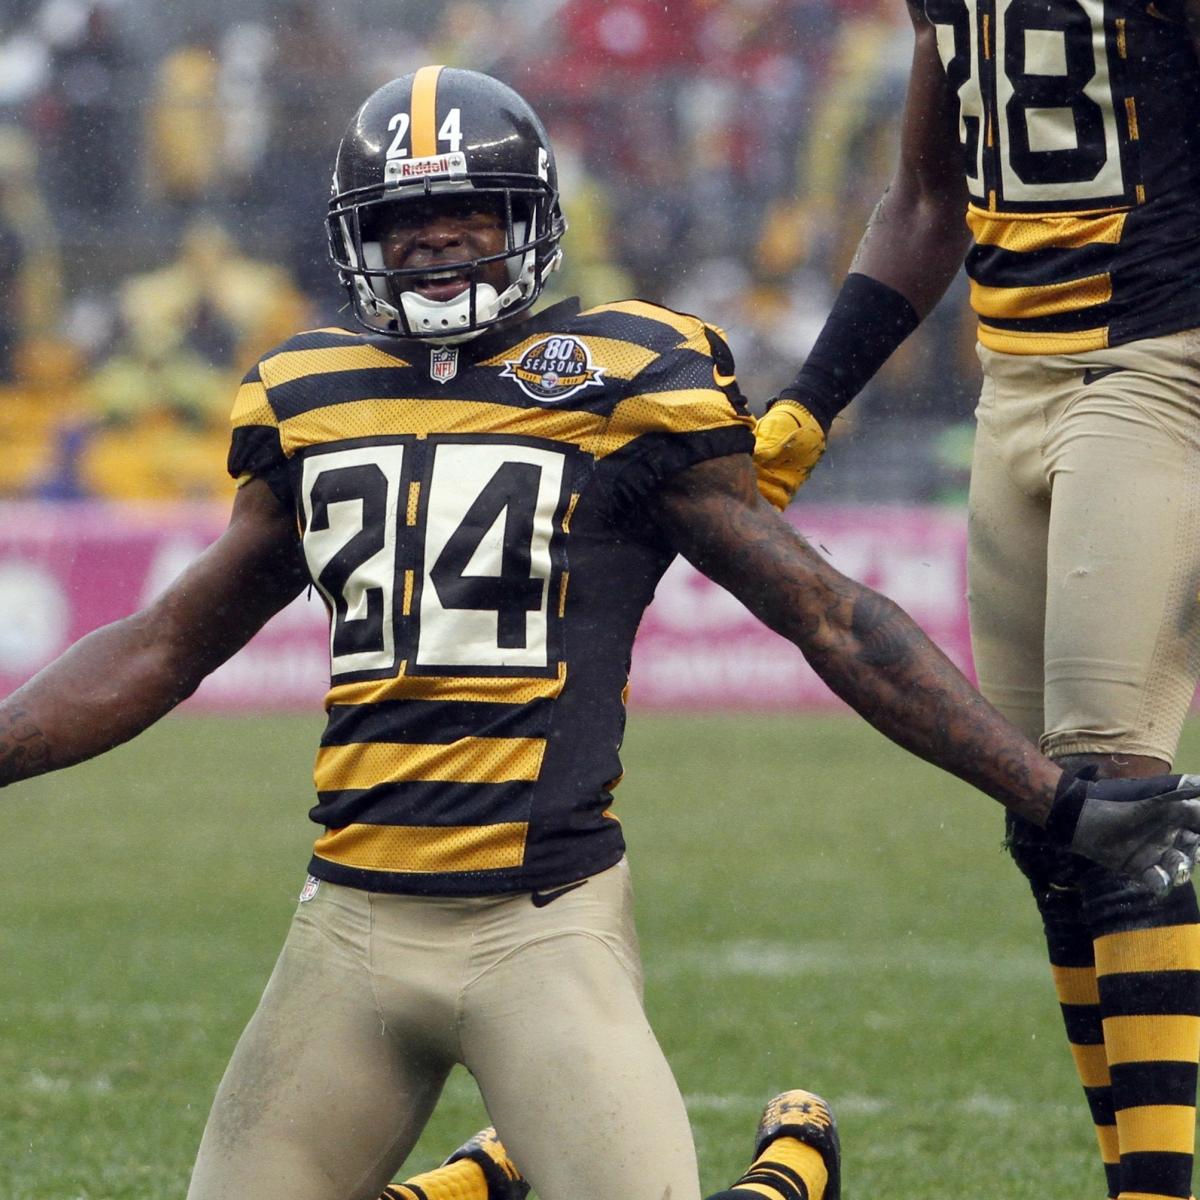 Pittsburgh Steelers Throwback Uniforms: Grading the Outlandish